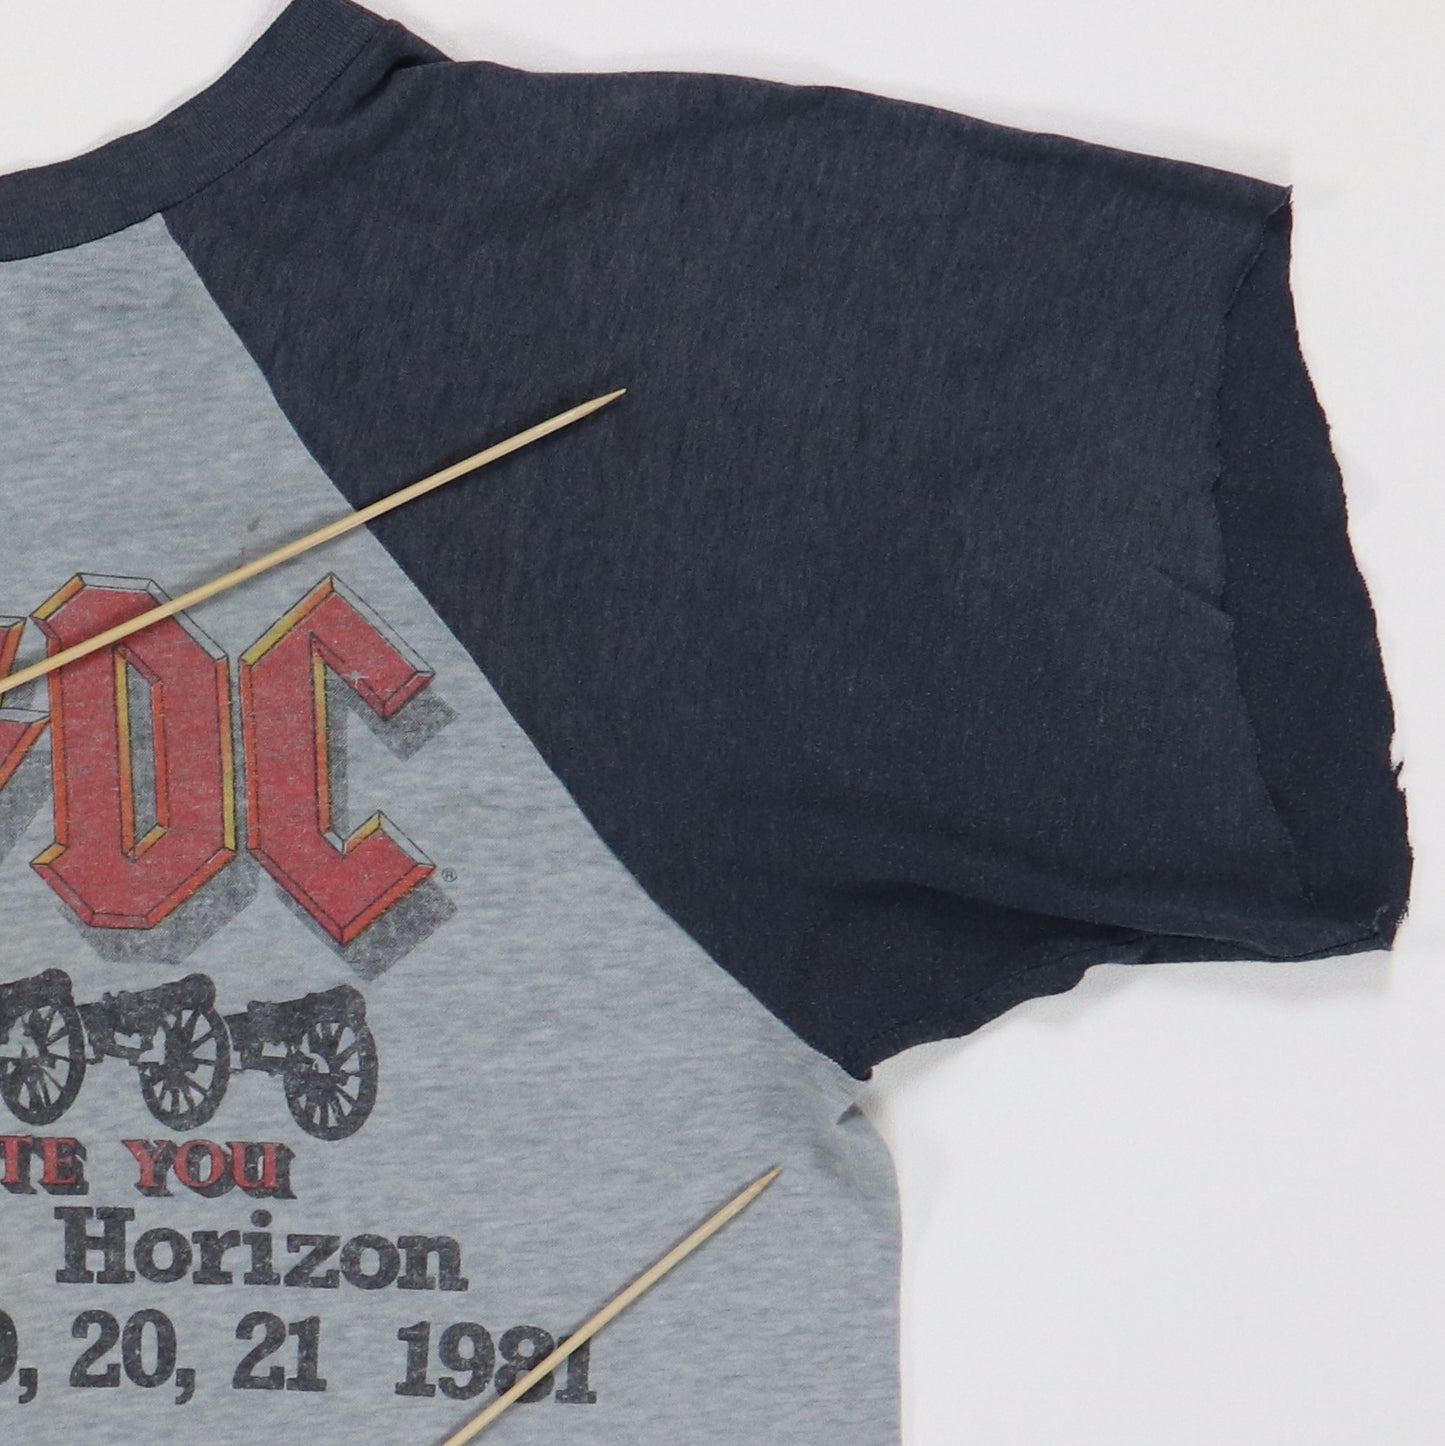 1981 ACDC For Those About To Rock Tour Jersey Shirt